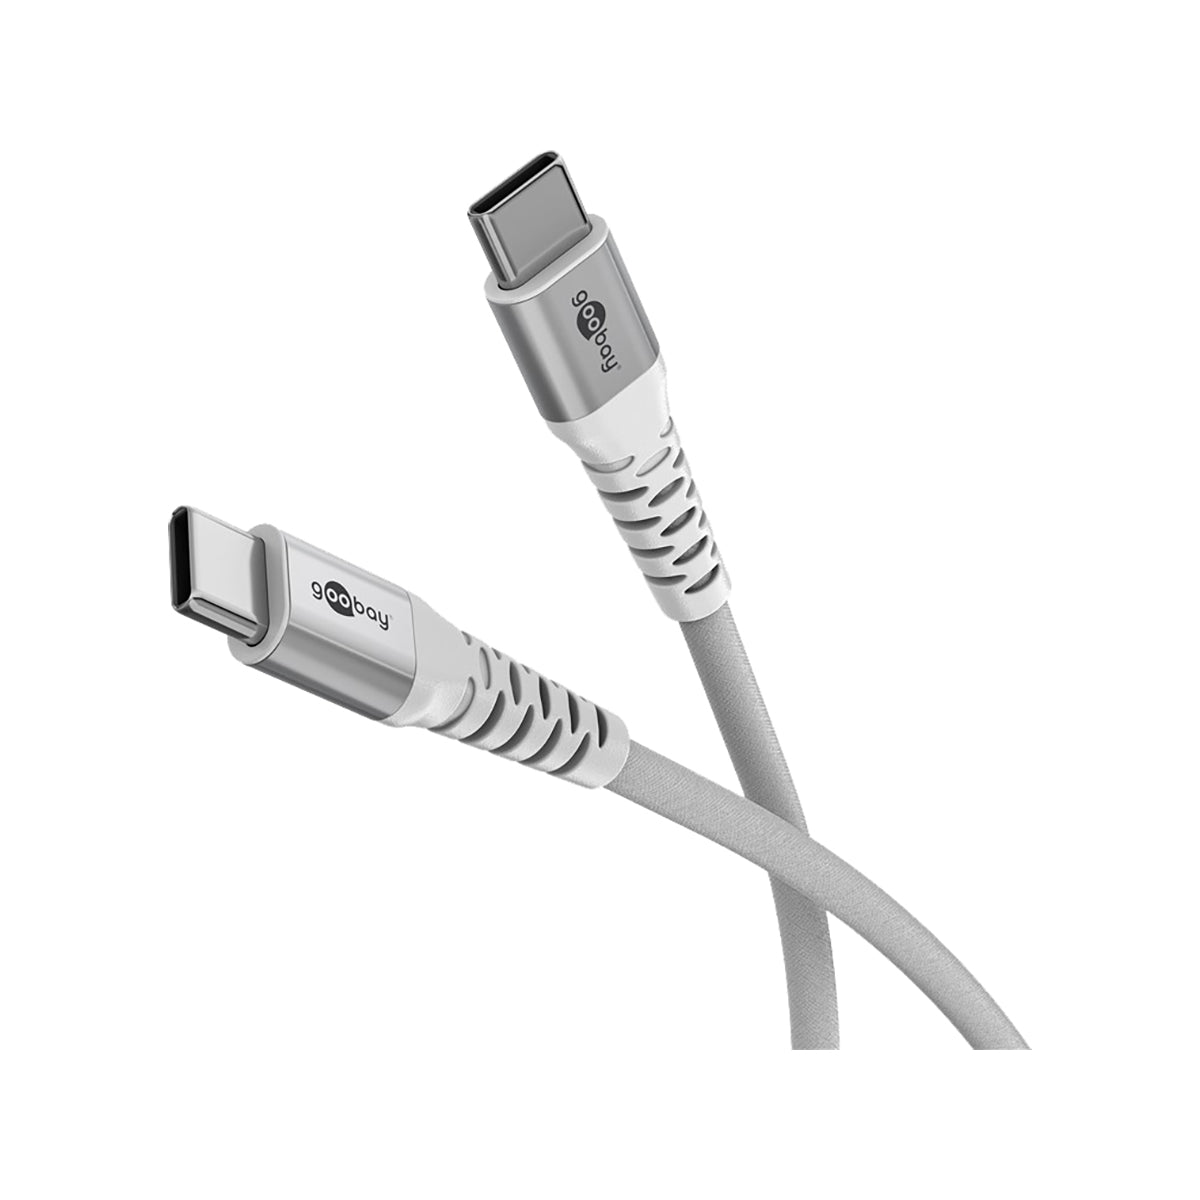 Goobay USB-C™ Supersoft Textile Cable with Metal Plugs 1 m for Smartphone/Tablets/Laptops - White